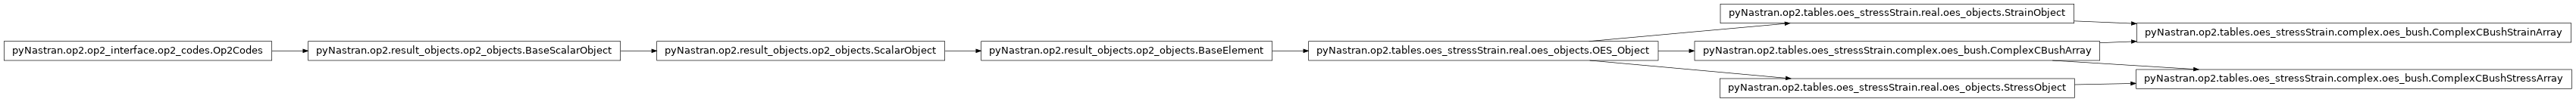 Inheritance diagram of pyNastran.op2.tables.oes_stressStrain.complex.oes_bush